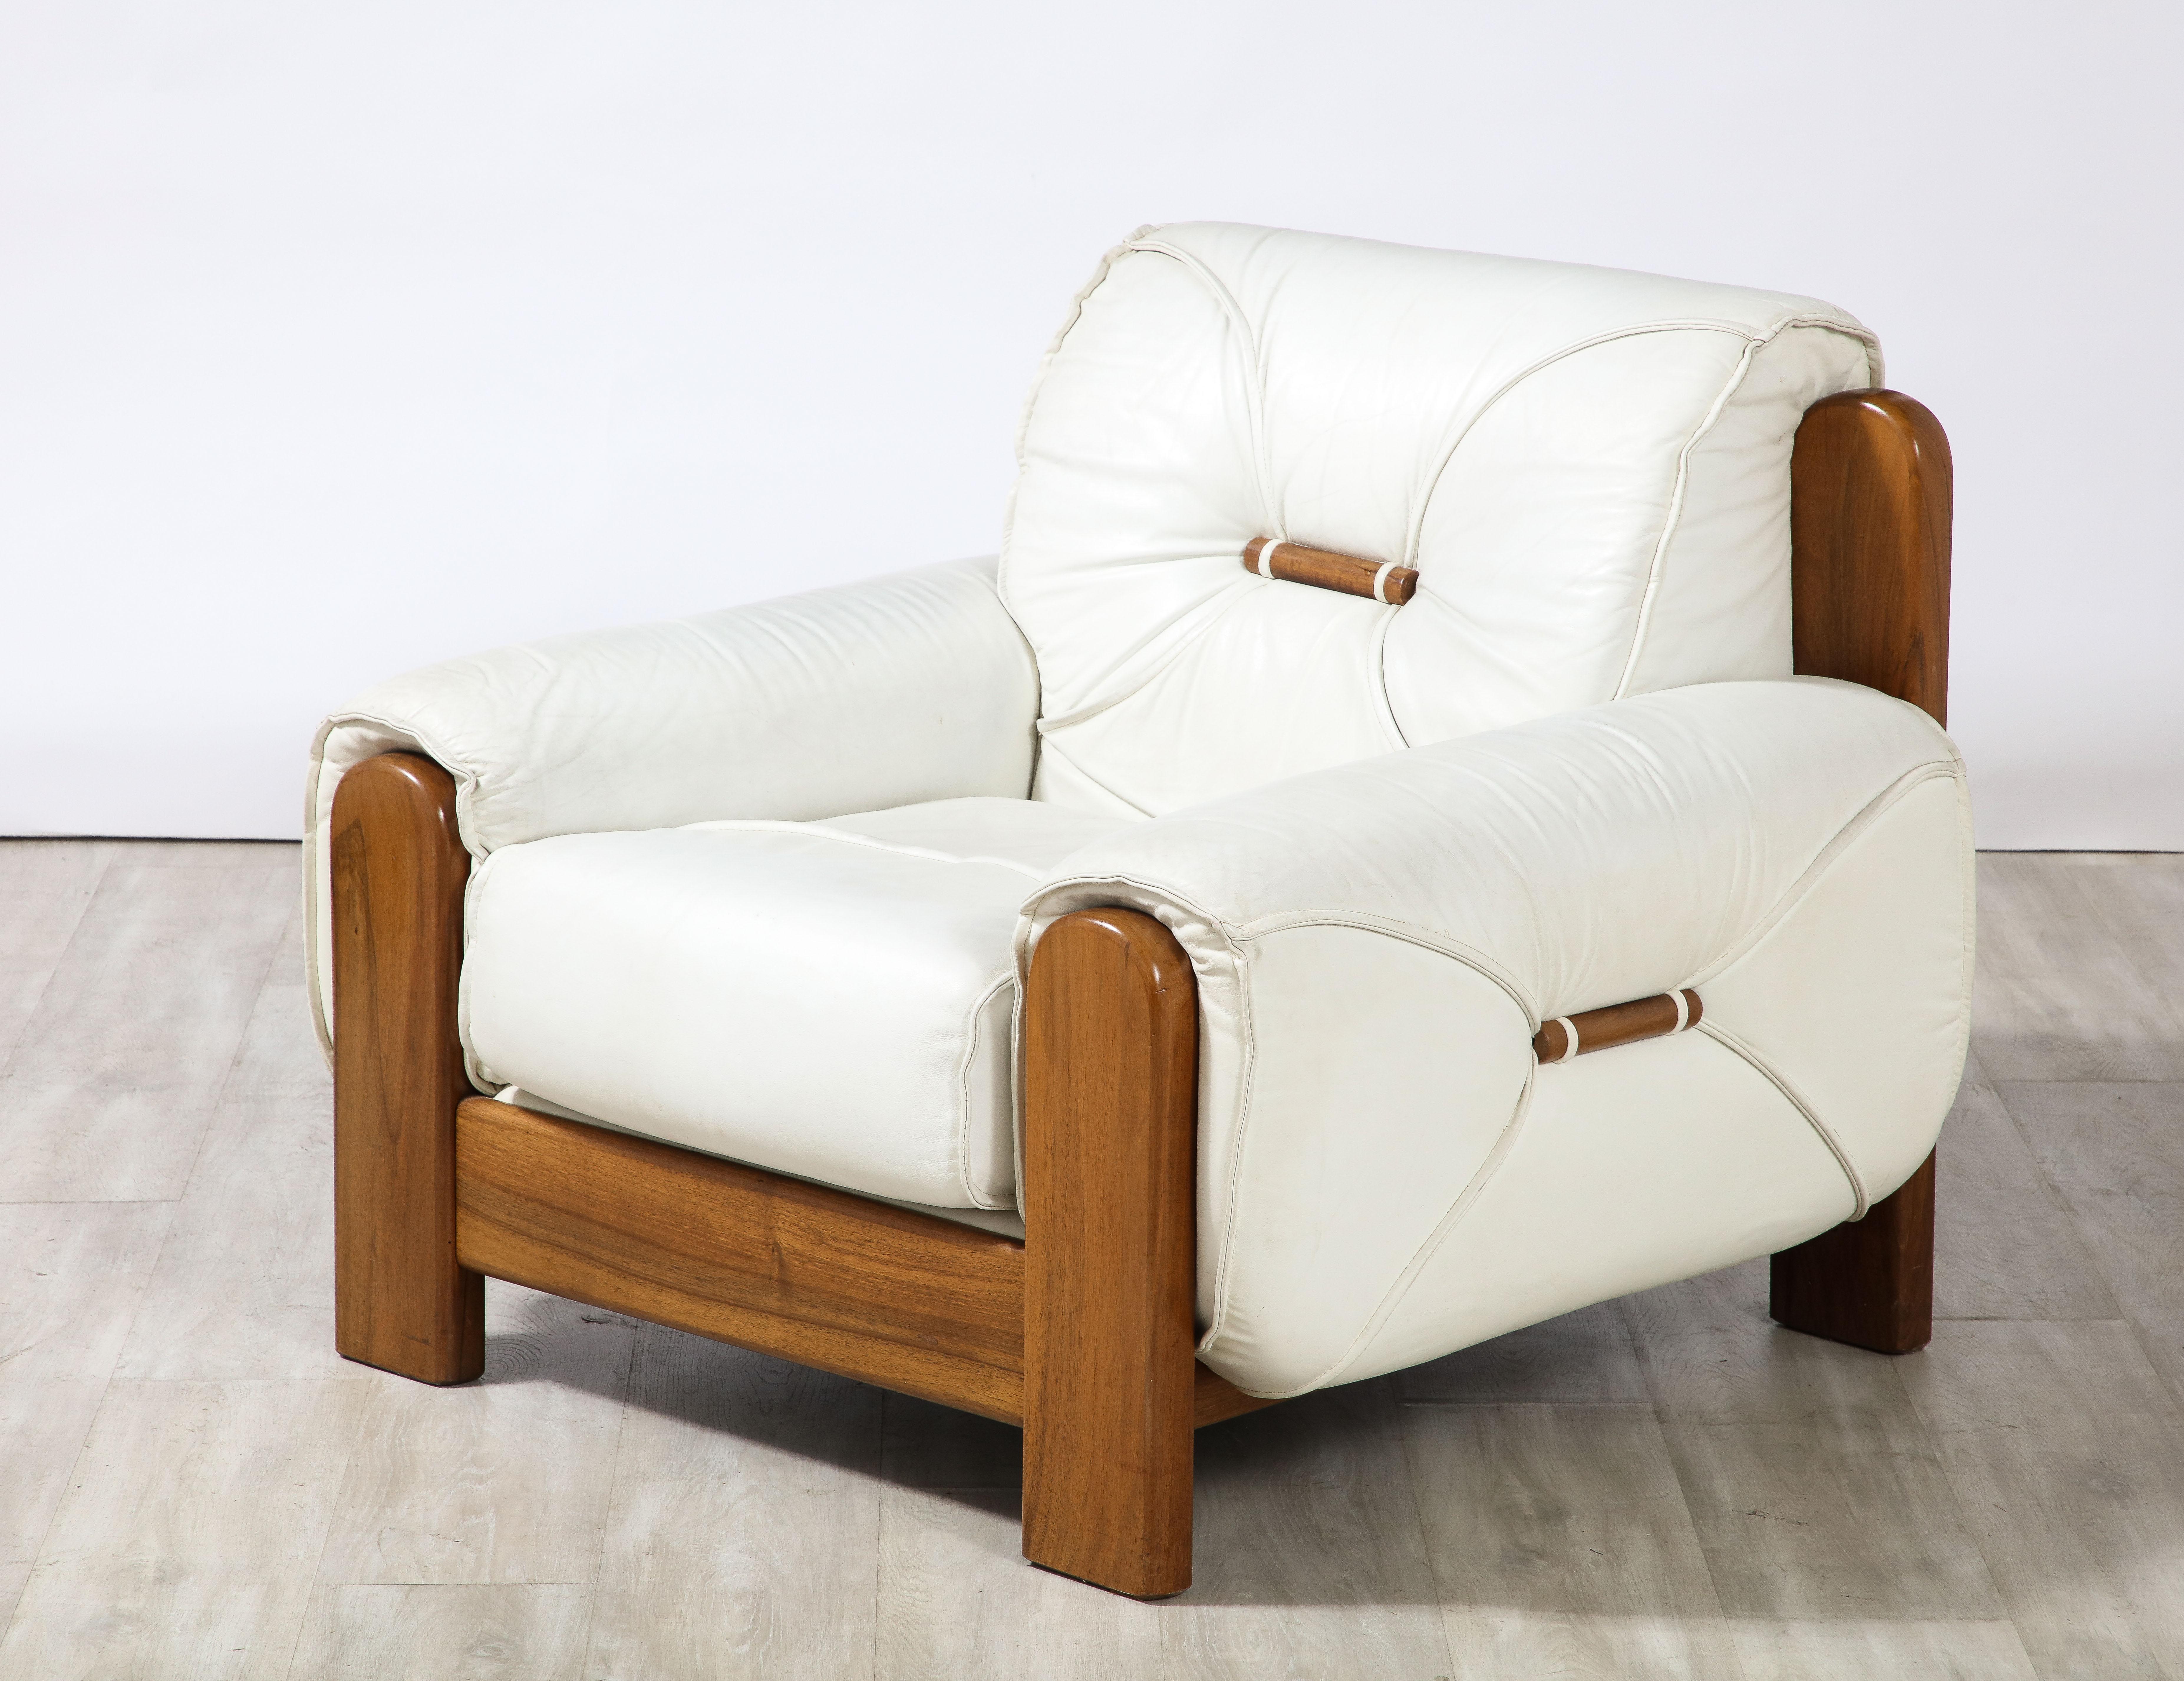 Pair of Italian 1970's Walnut and White Leather Lounge Chairs For Sale 4